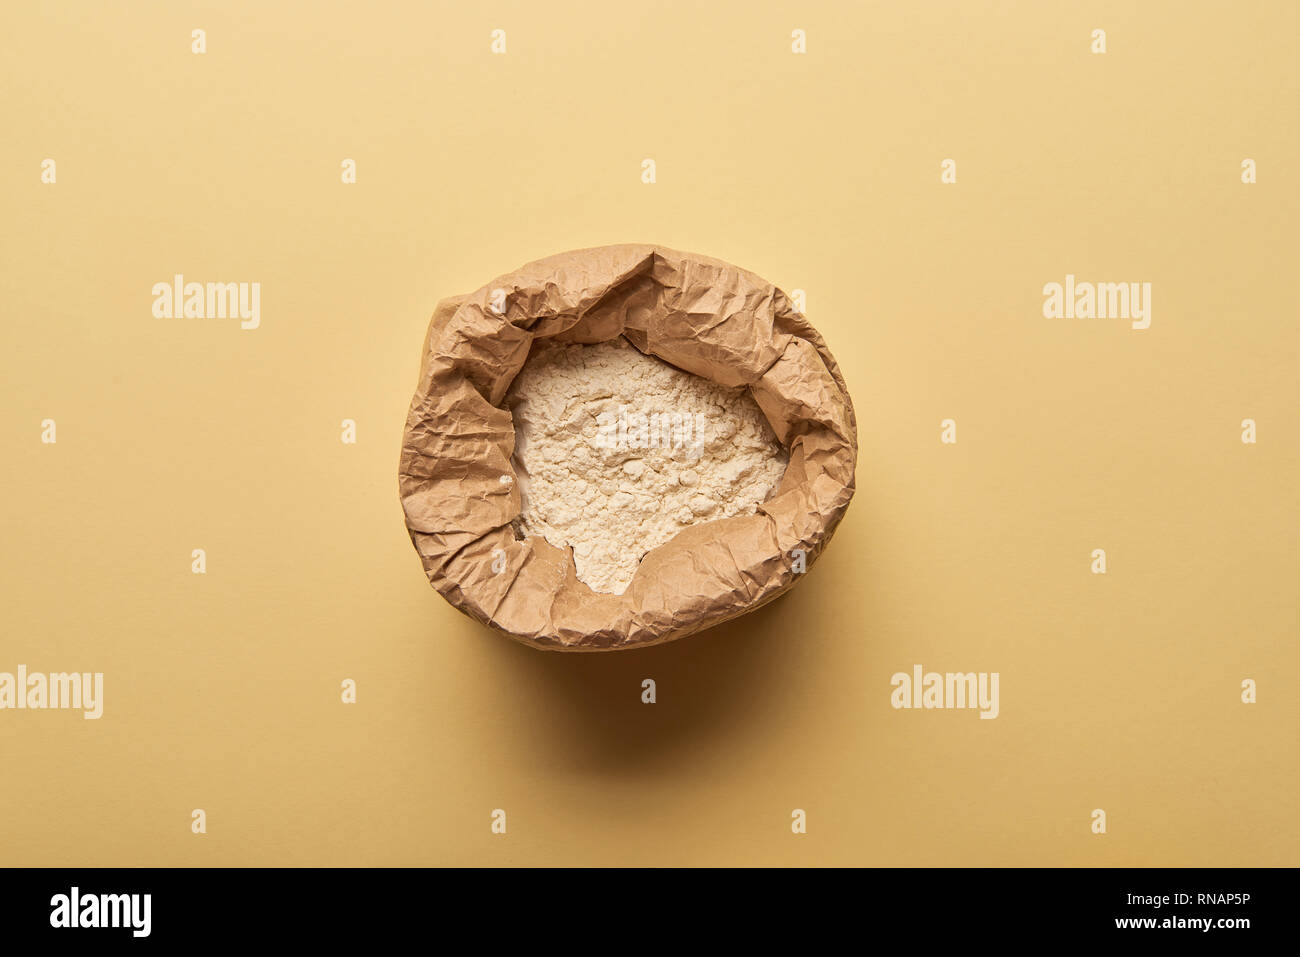 Top View Of Paper Bag Full Of Flour On Yellow Background Stock Photo Alamy